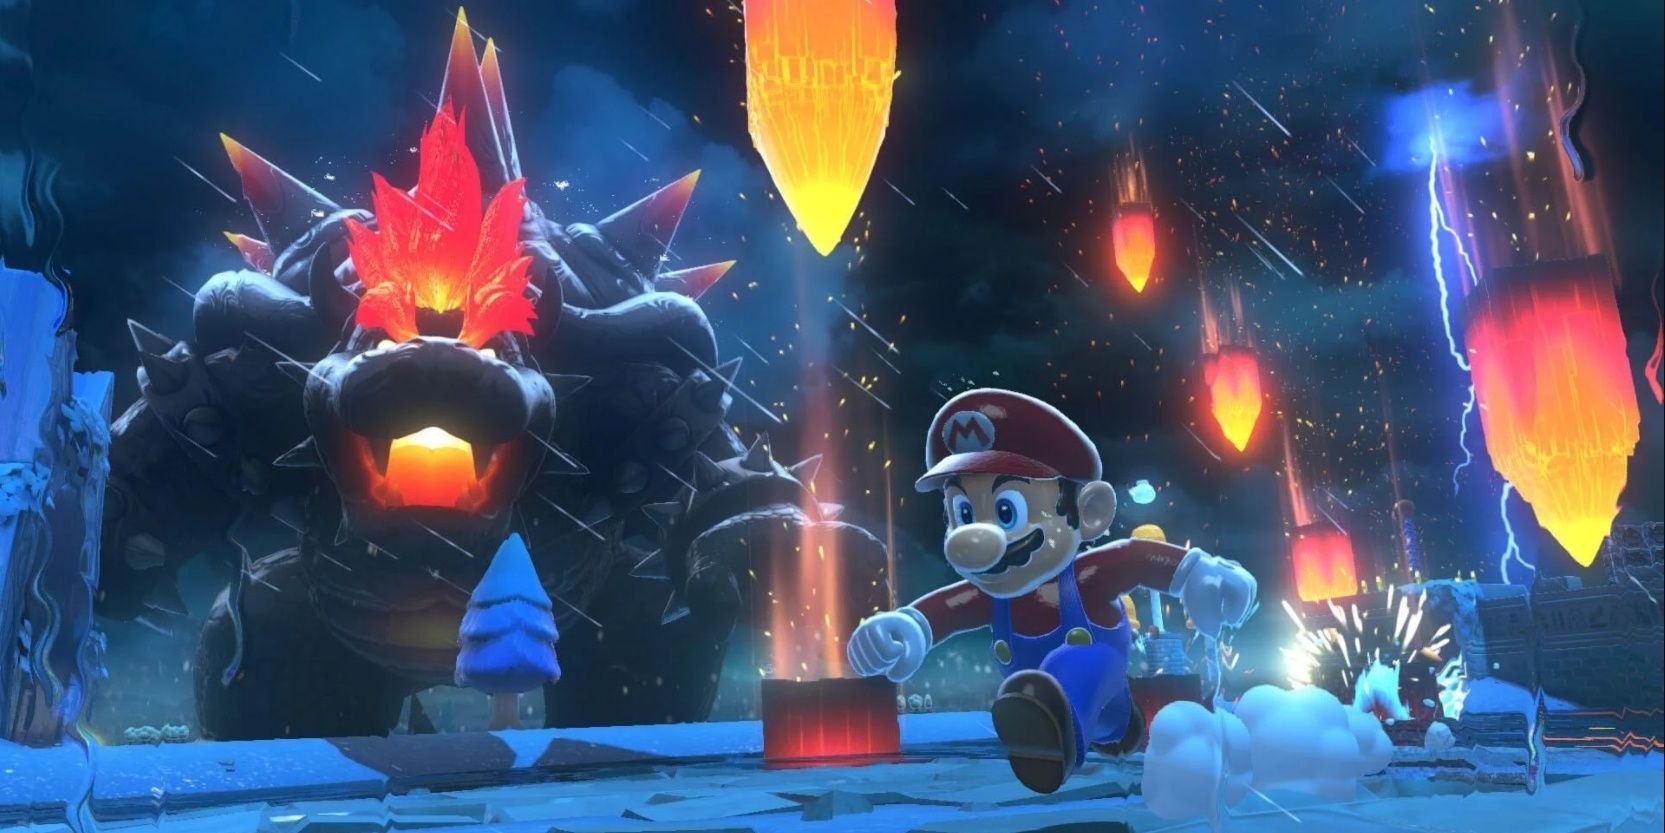 Mario being chased by Fury Stakes with Fury Bowser watching in Bowser's Fury